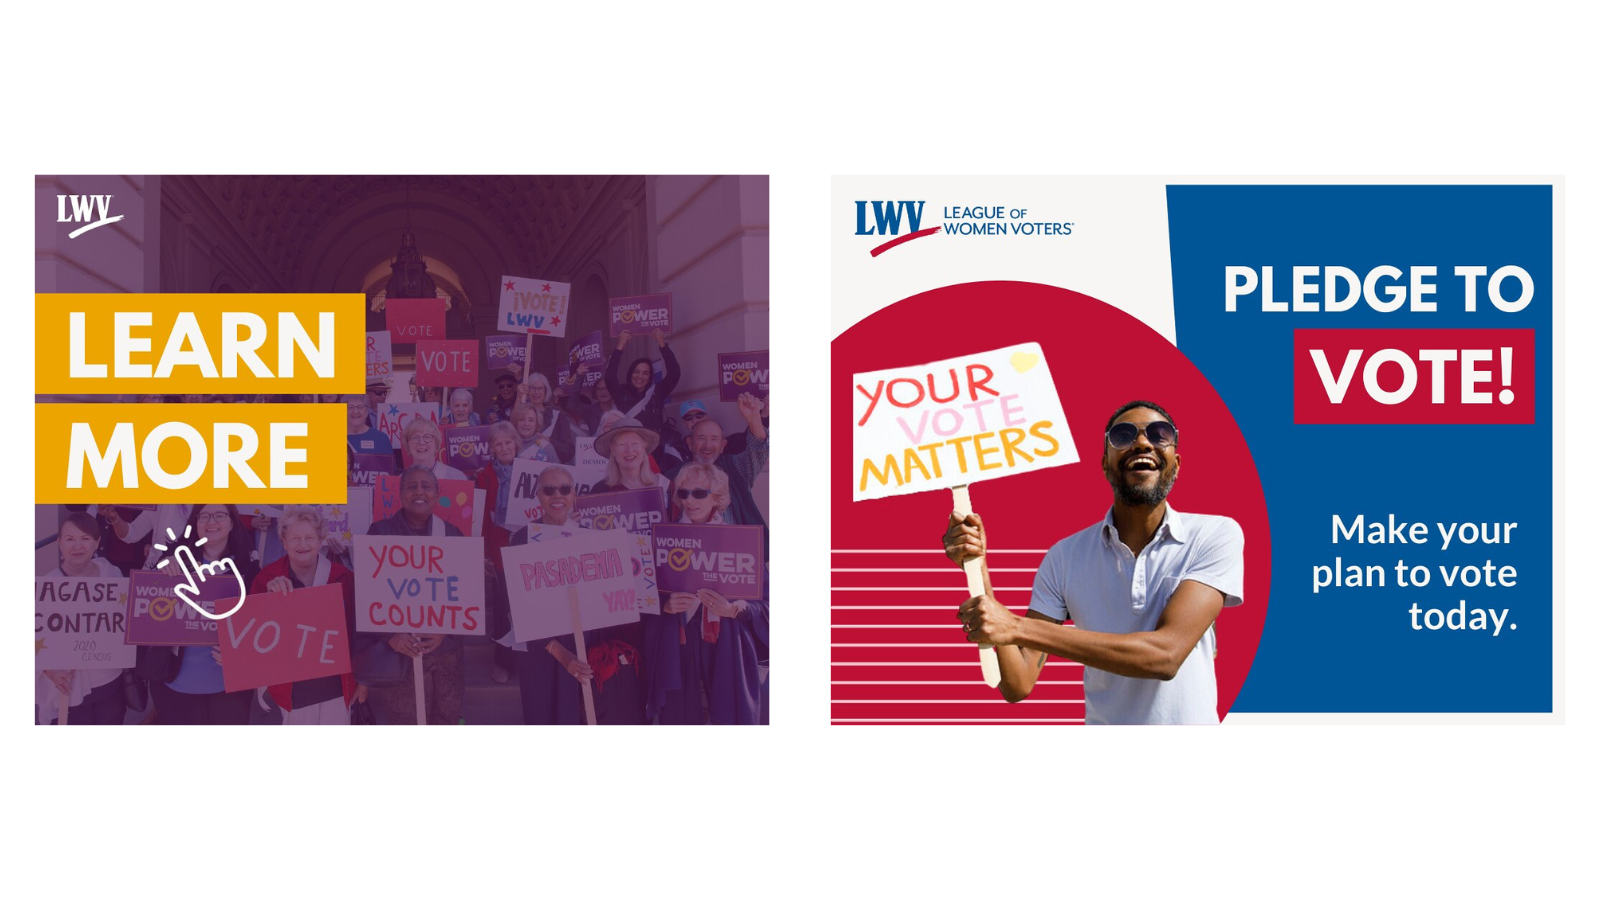 Two examples of graphics from LWV's general graphics library. The are two graphics next to one another horizontally. On the left, there is a graphic of a group of women holding voting signs with a purple filter over the image. There is a click icon and text with yellow background that says "LEARN MORE." The graphic on the right features a man in a red circle, holding a sign that says "YOUR VOTE MATTERS." To the right of the red circle, half of the graphic is blue. There is text over the blue section that says "PLEDGE TO VOTE, make your vote today."